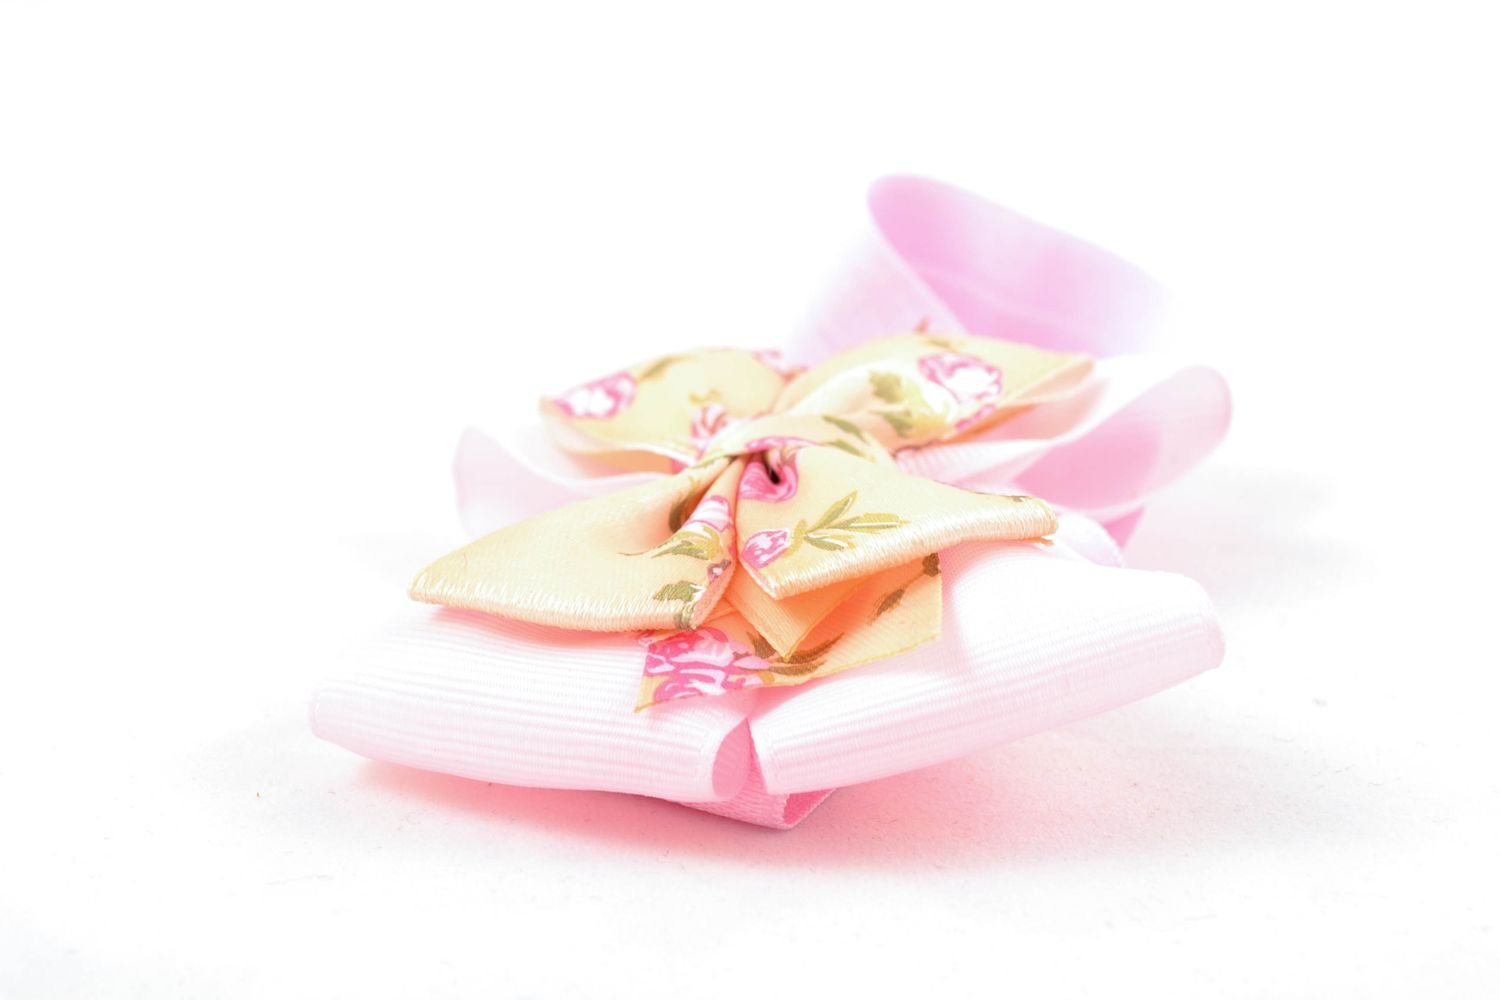 Designer headband with pink bow and rep ribbons photo 5